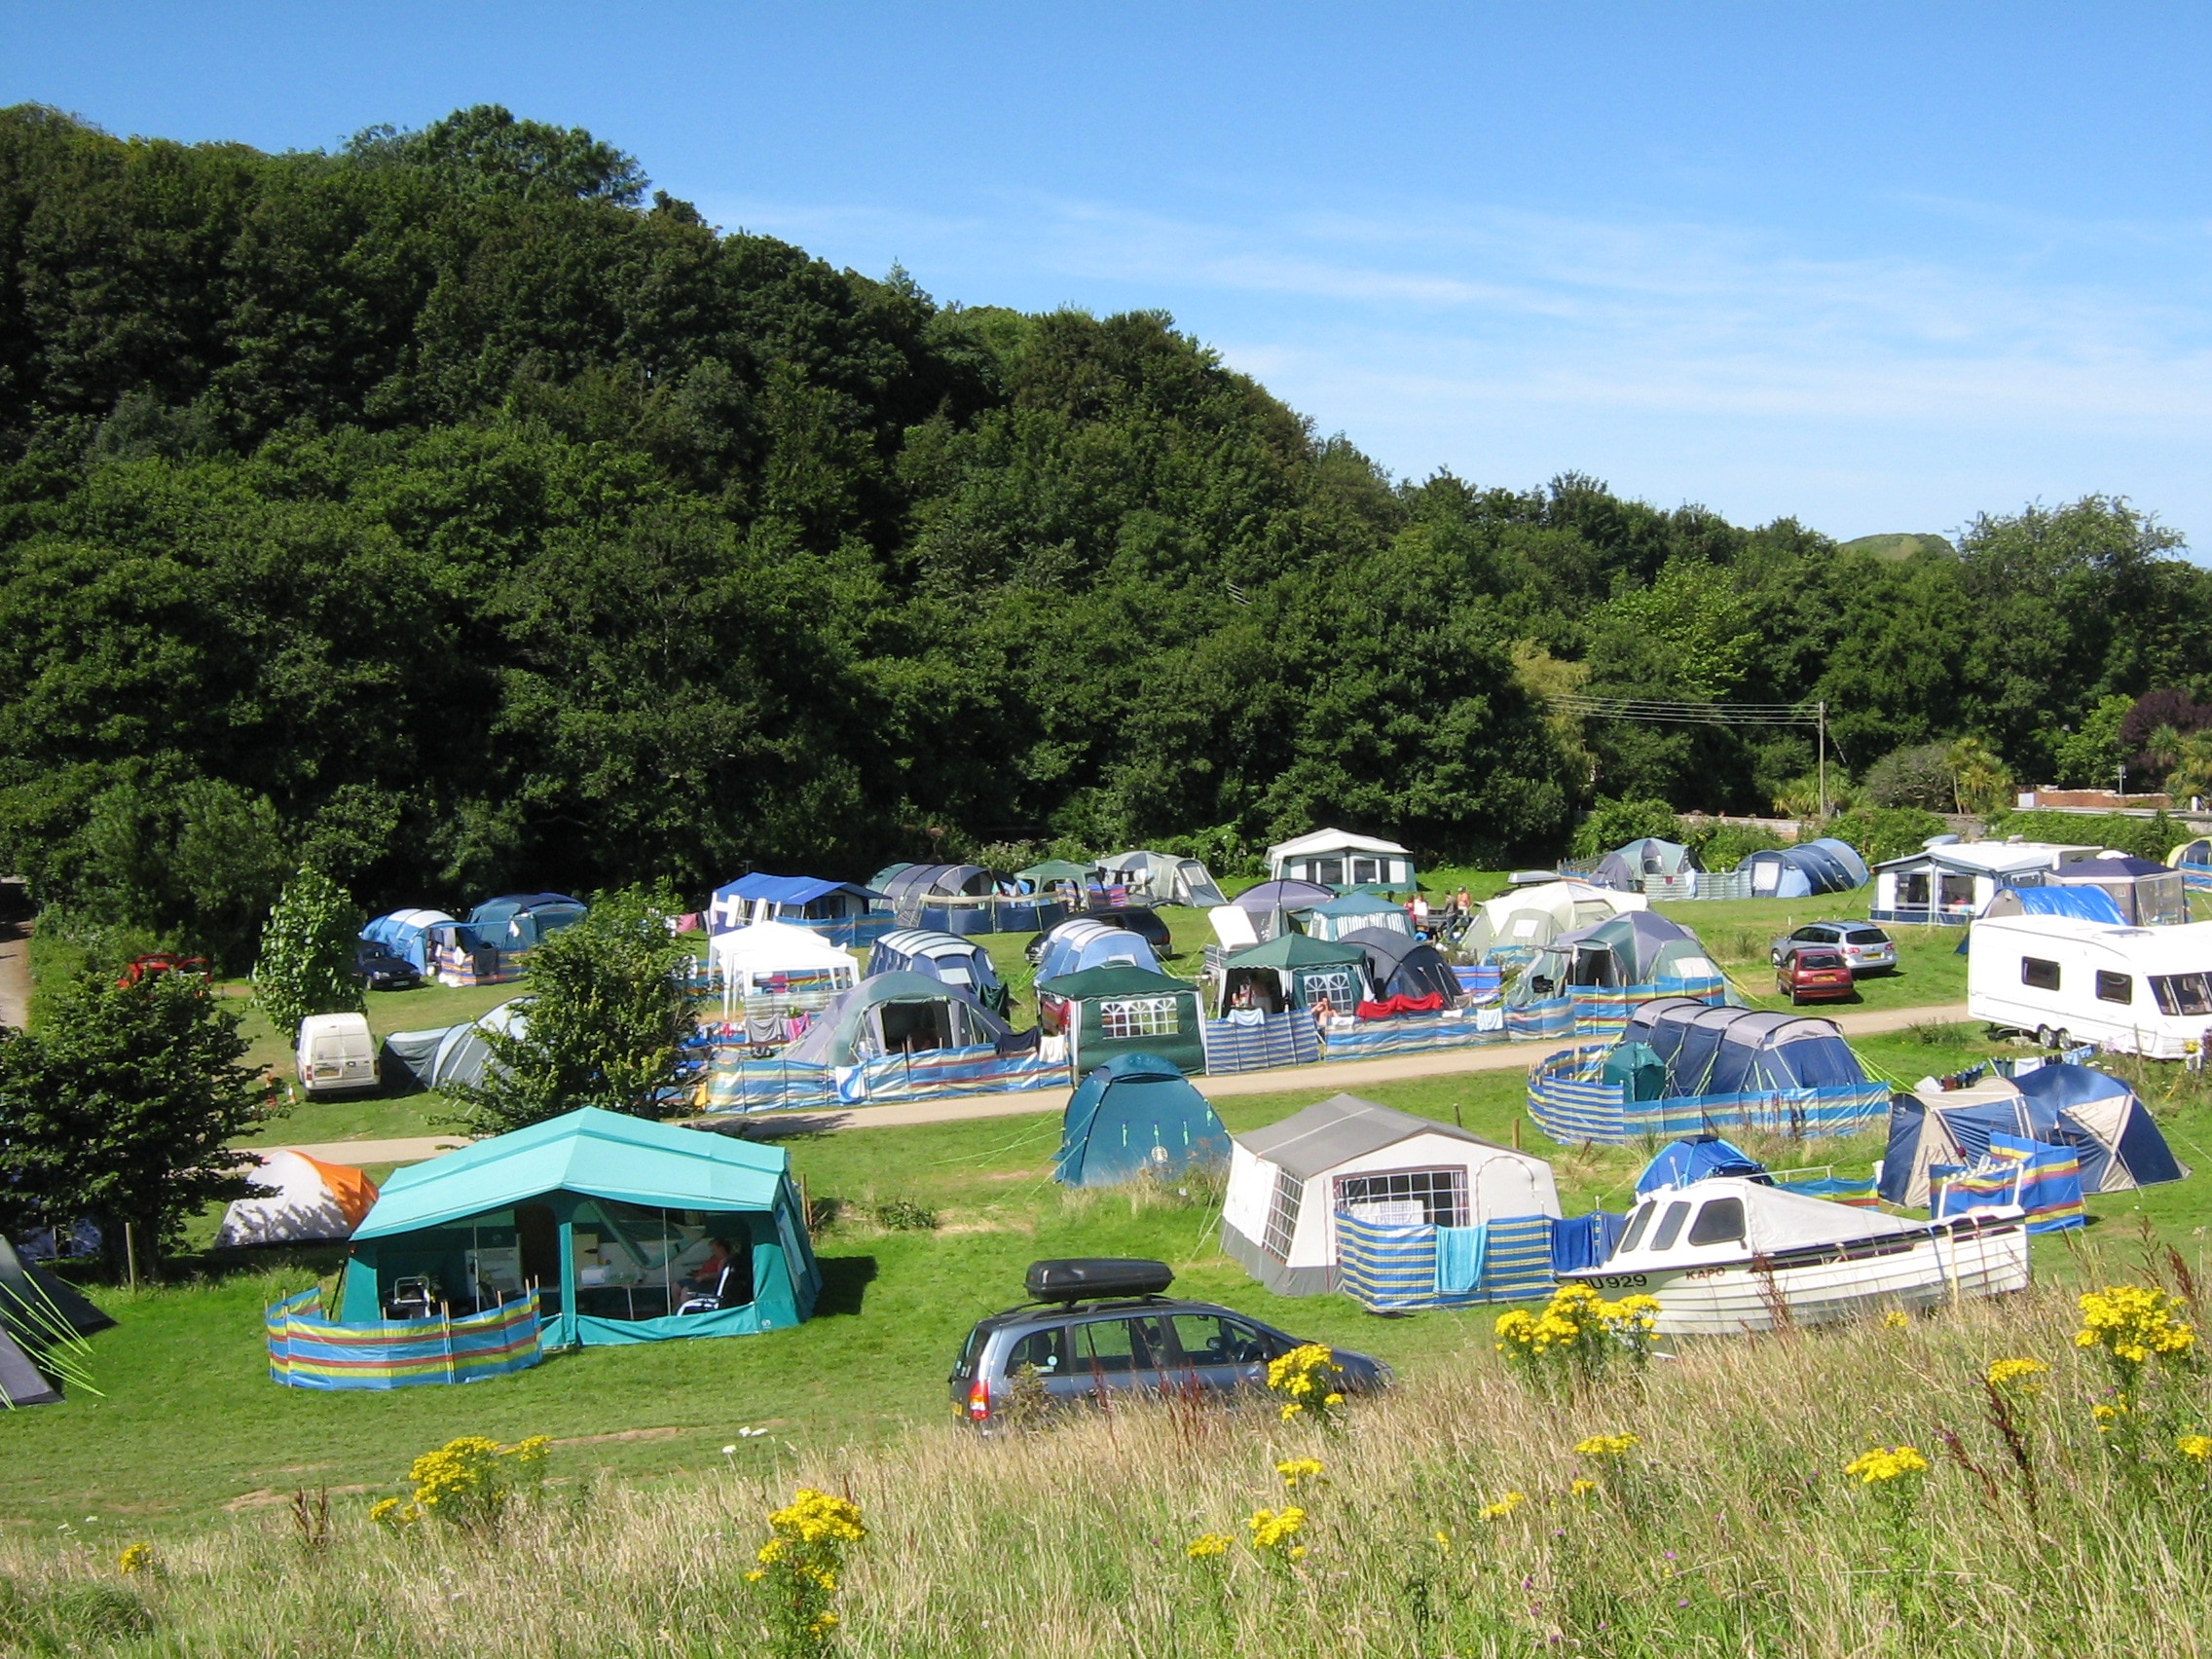 Watermouth Valley Camping Park